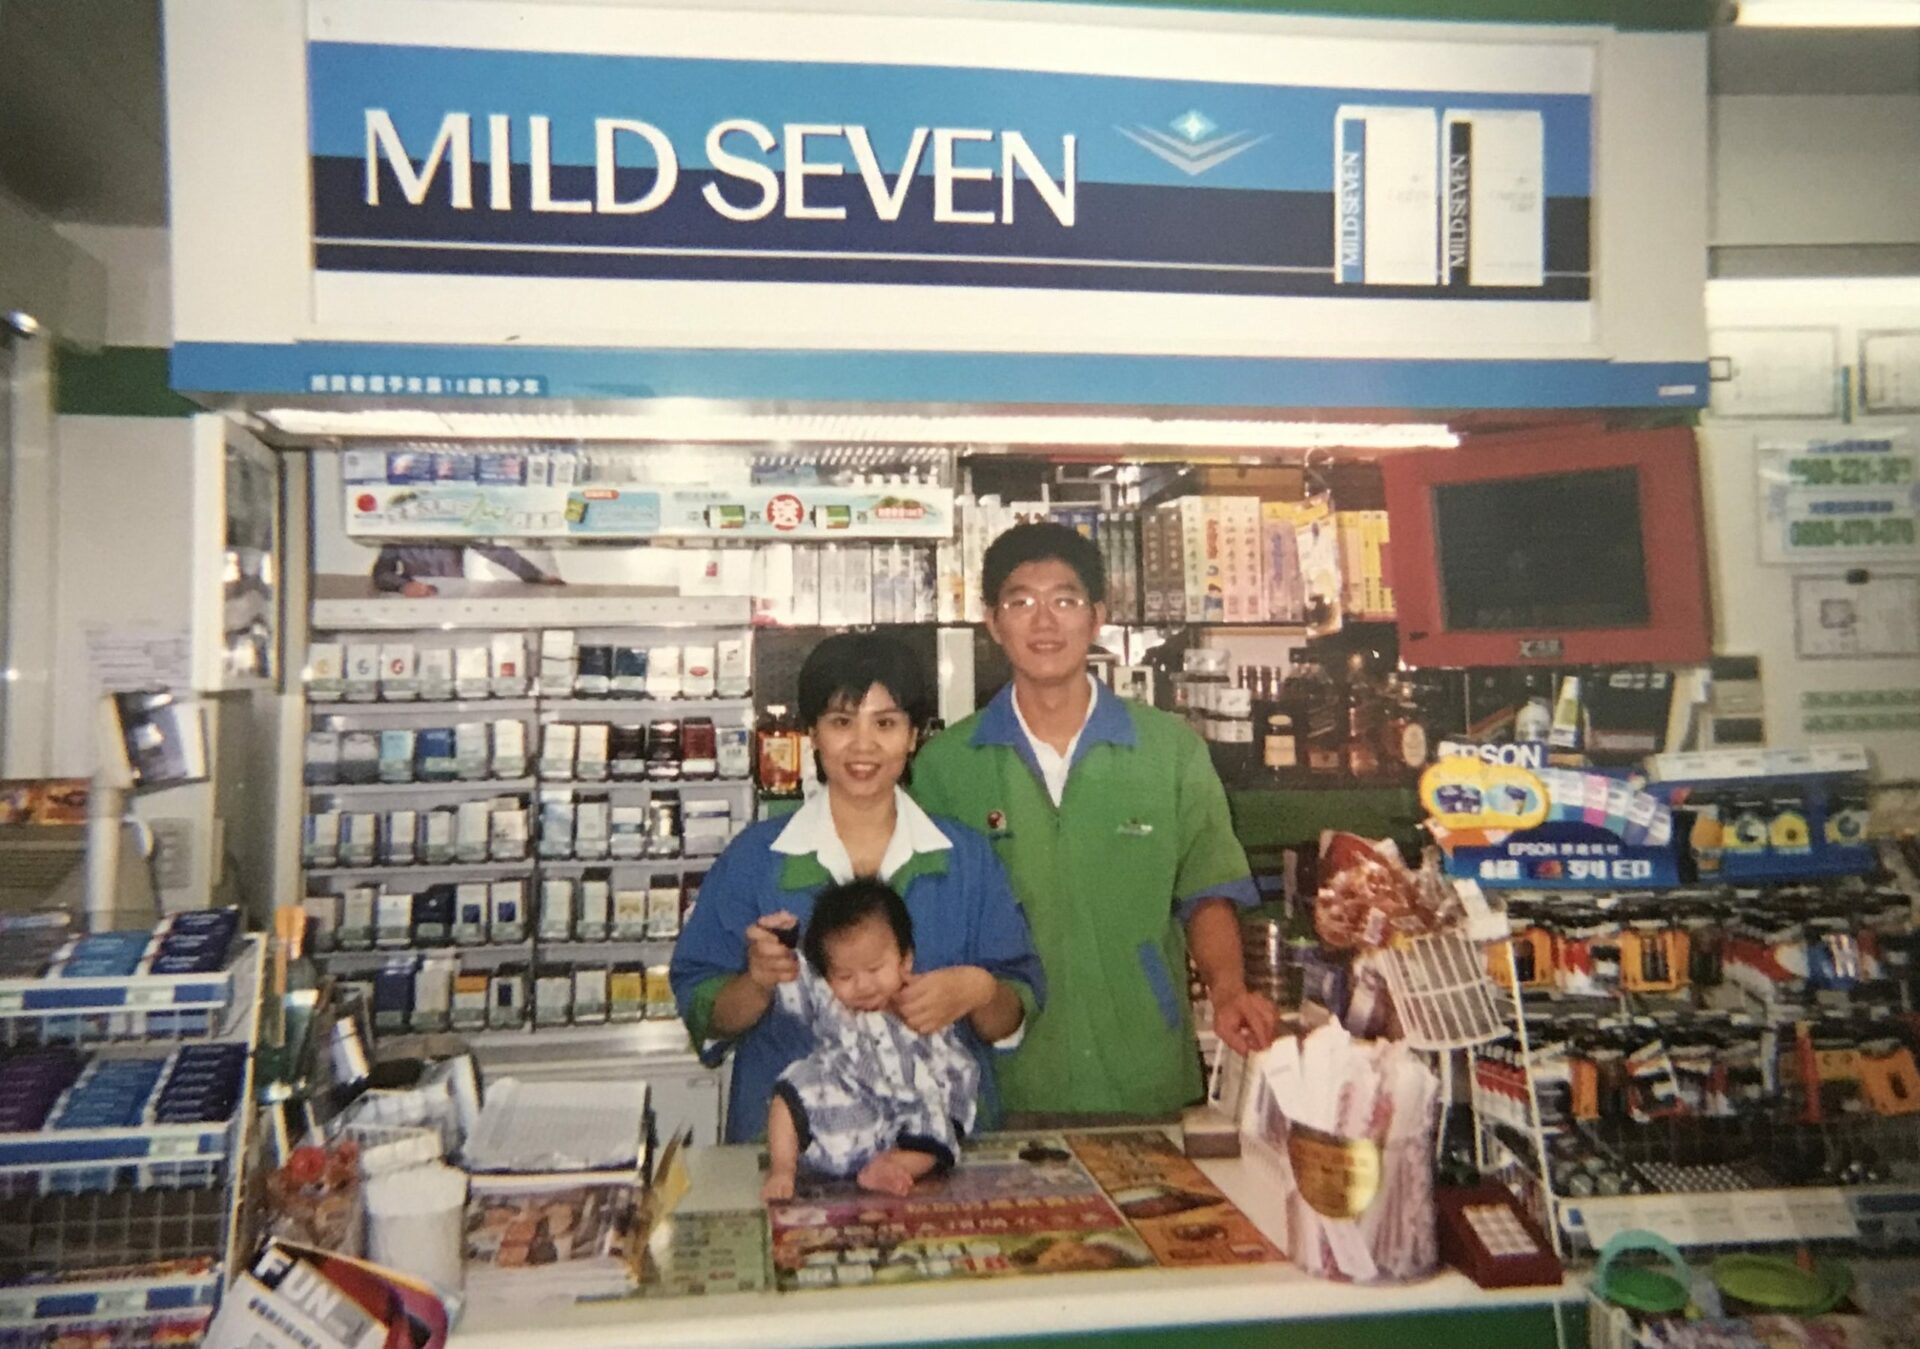 A photograph of a family of three standing behind a convenience store counter